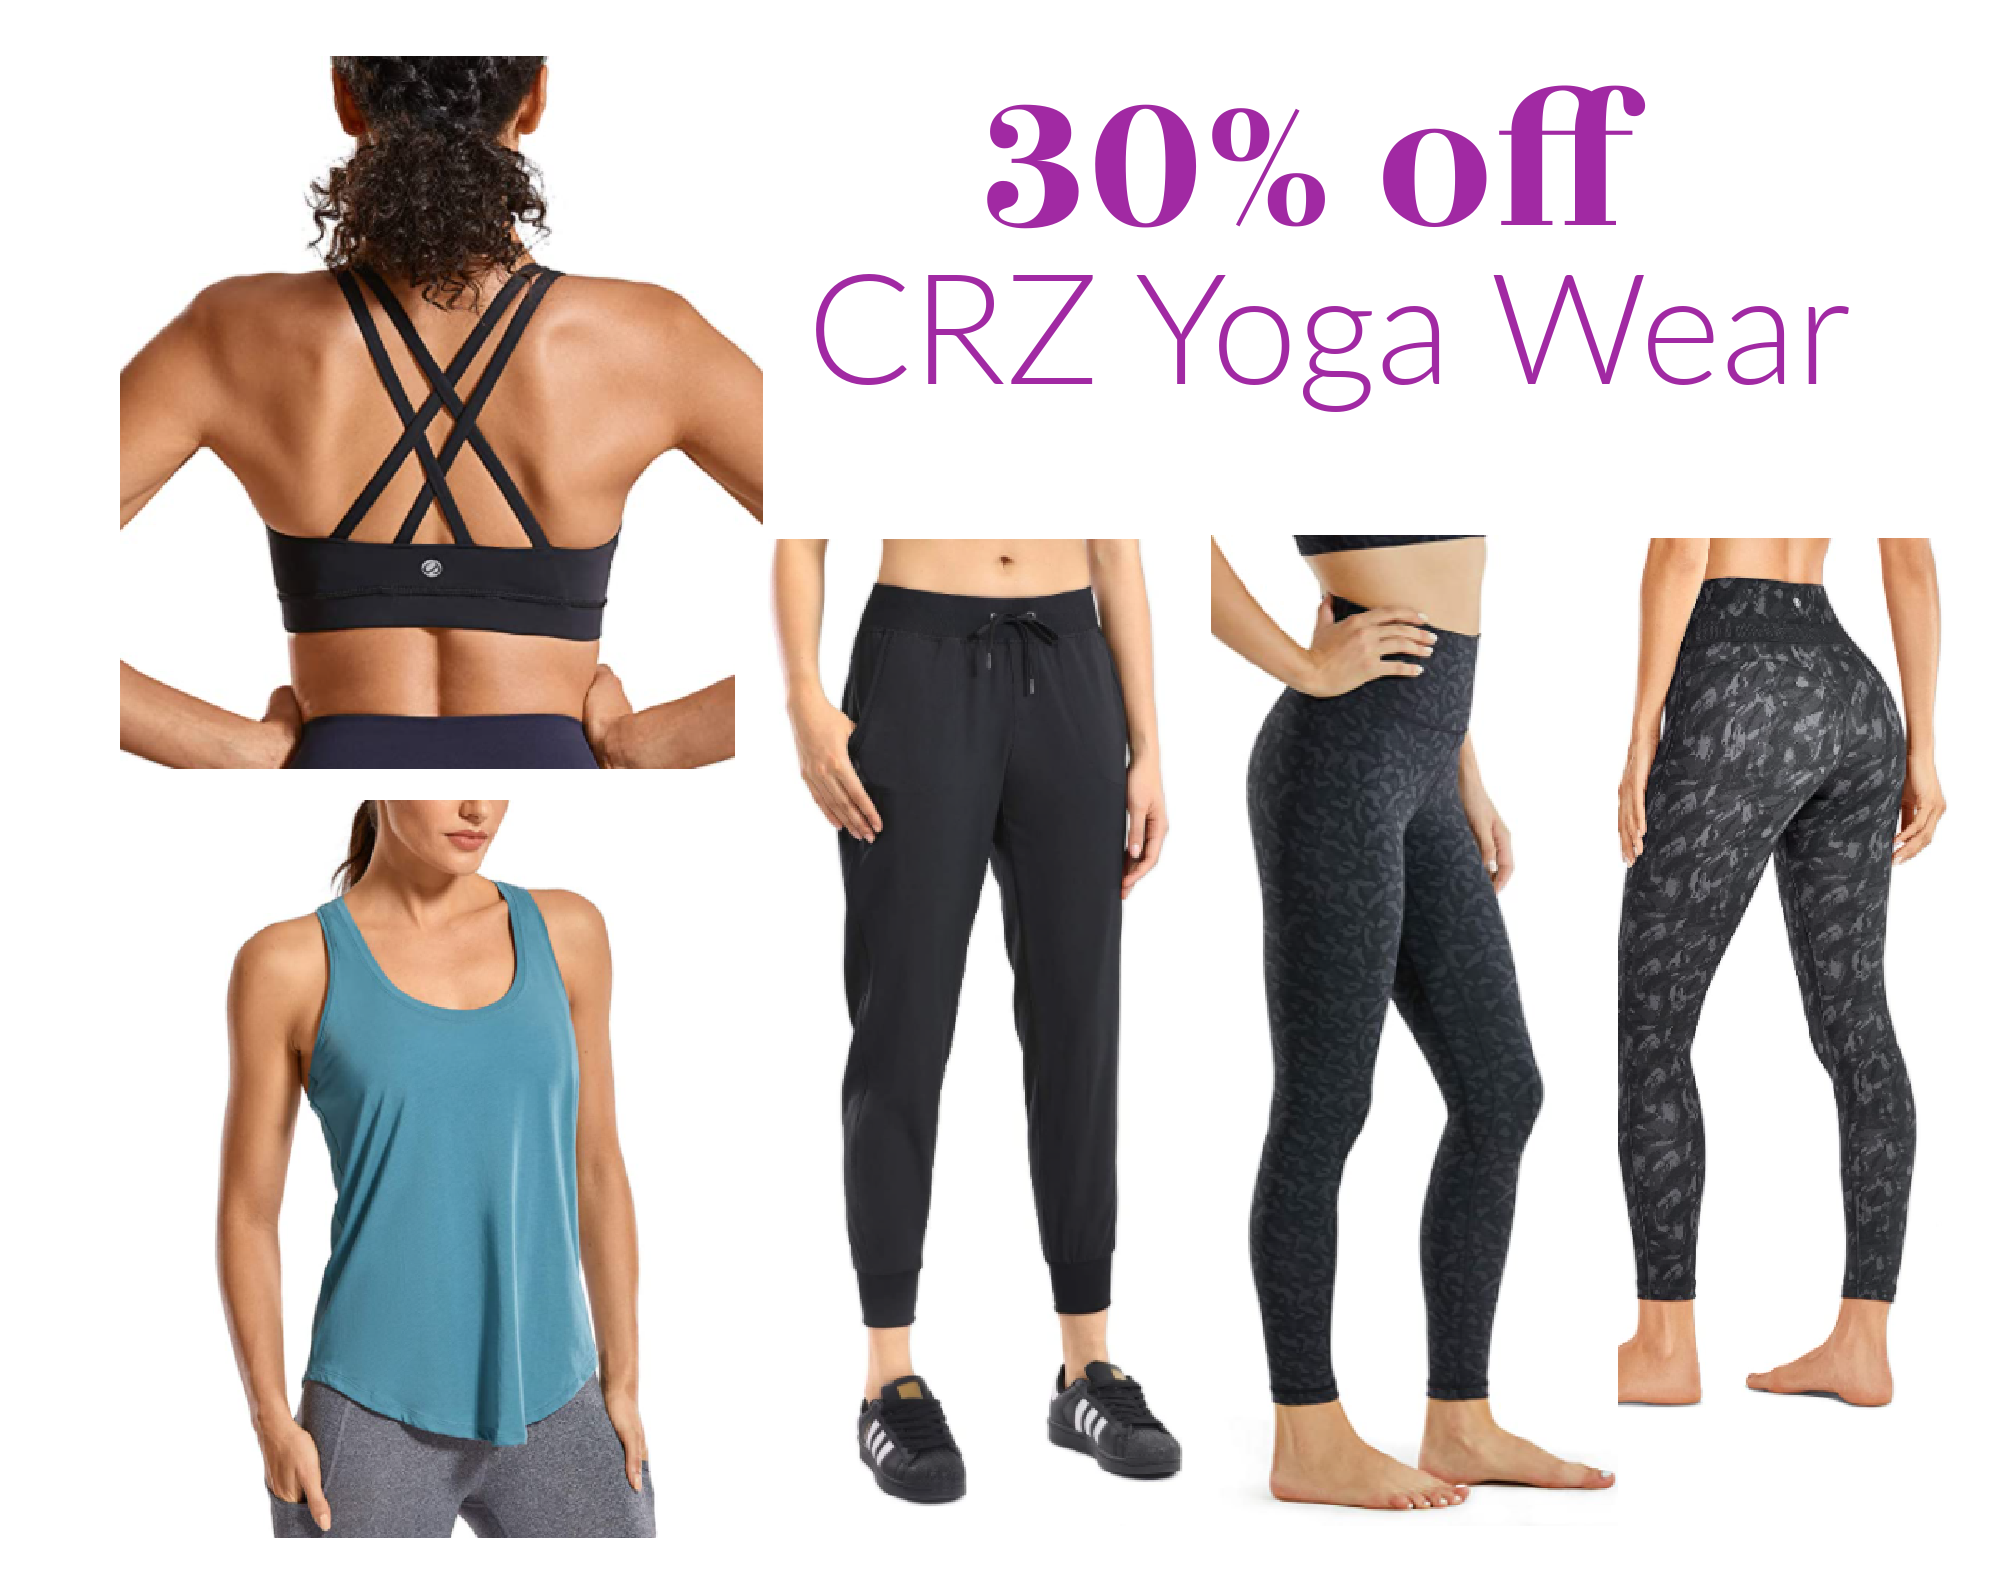 CDornerFitness - NEW COUPON CODE FOR YOU!! Have you tried CRZ Yoga